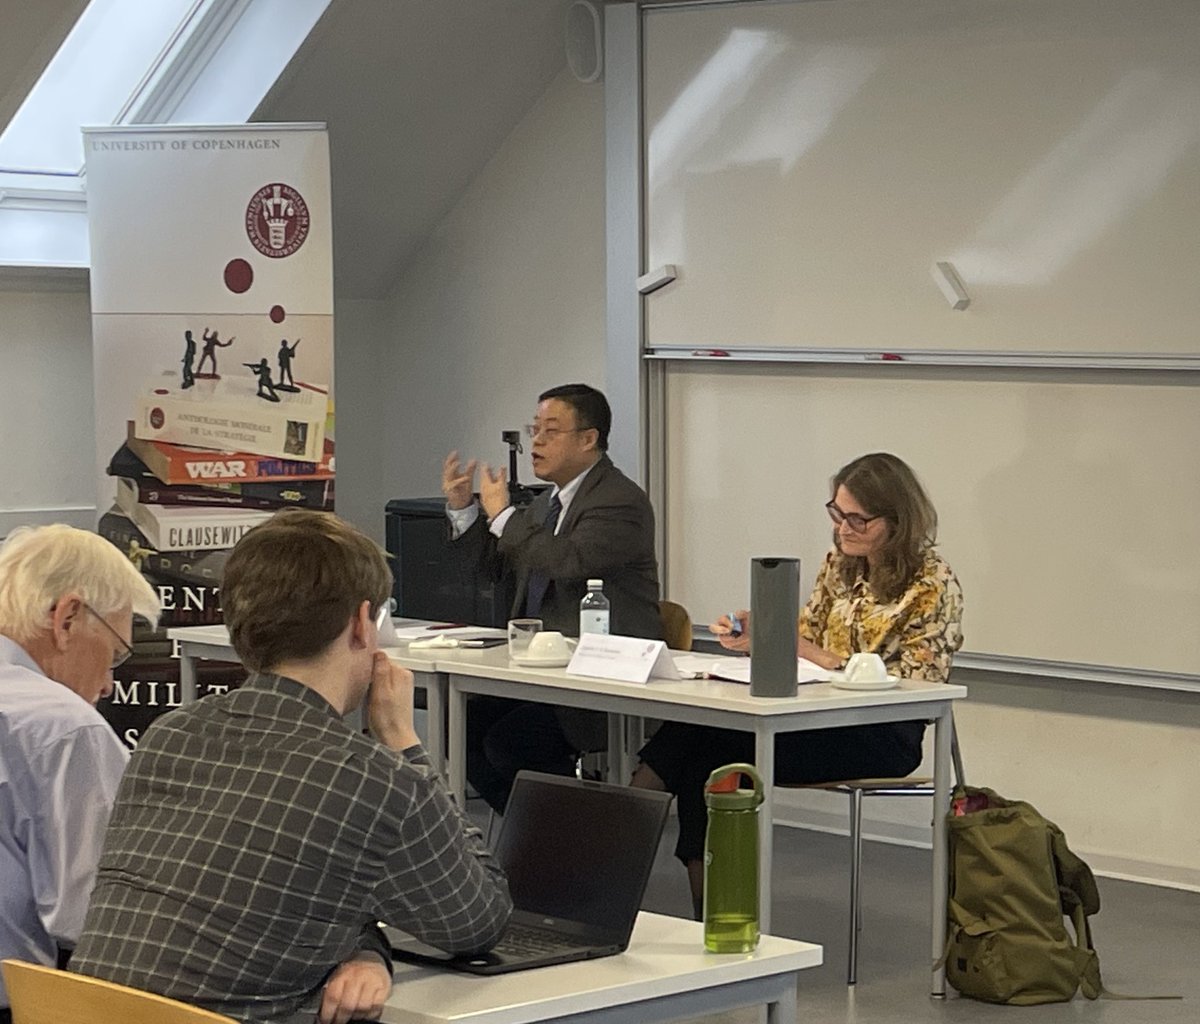 Yesterday, CMS hosted a seminar together with @PolsciCph on “A new (un)stable world order?”, feat. Kai He from Griffith University and @CamillaTNS from the Royal Danish Defence College. @AndersWivel moderated the debate. Thanks to all attending and contributing to the debate.